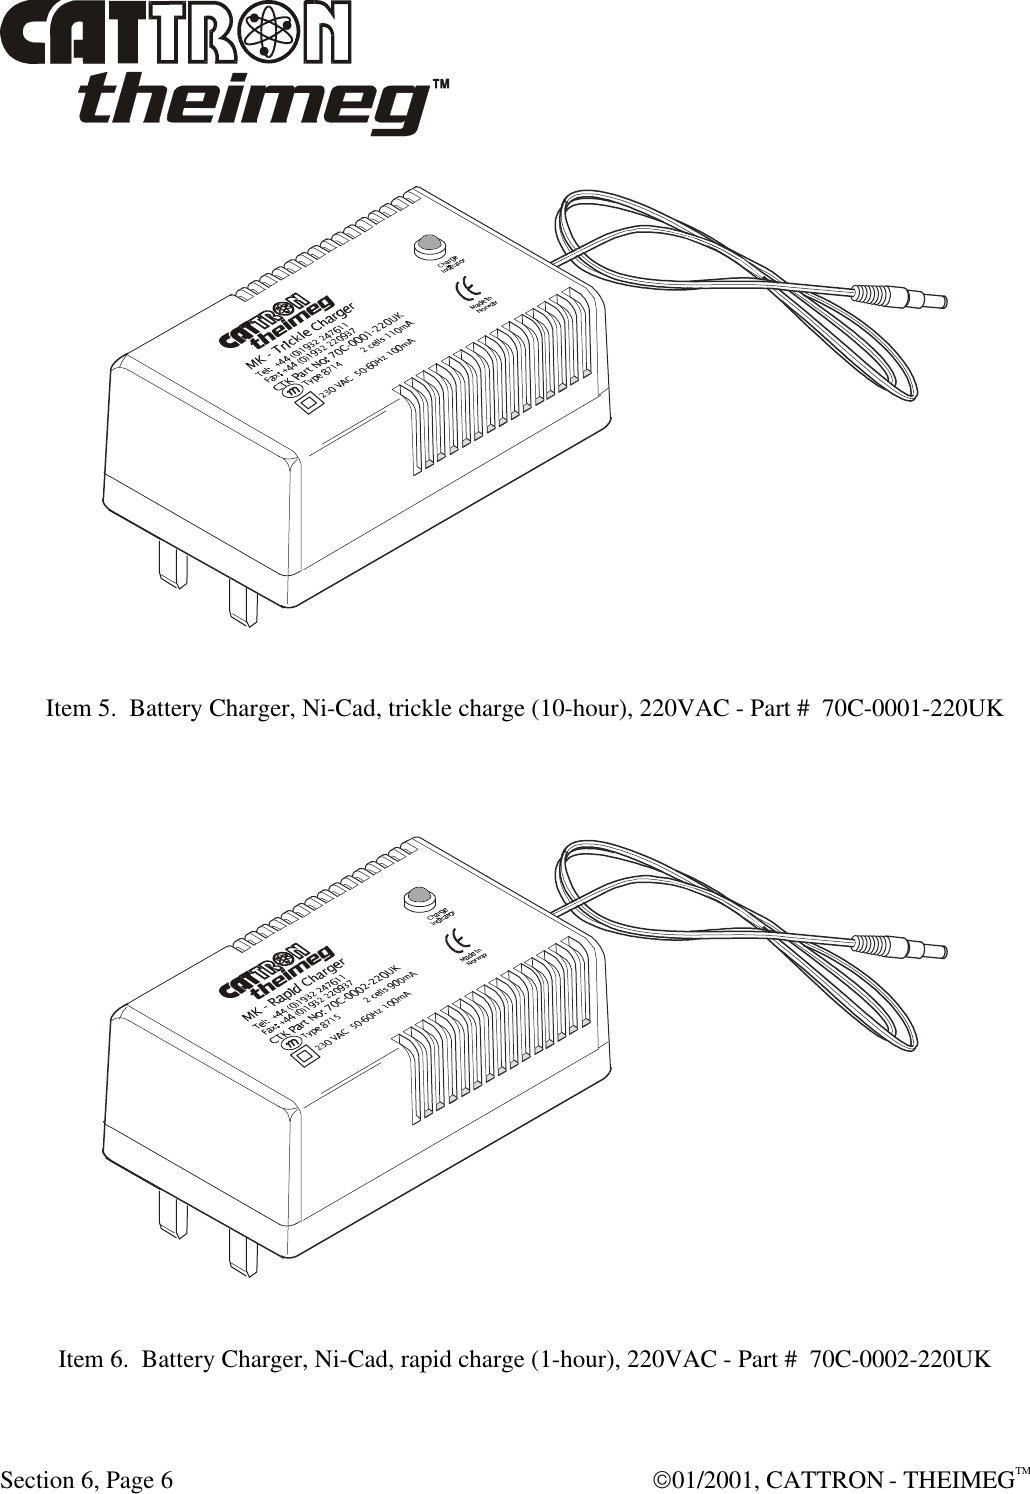  Section 6, Page 6  01/2001, CATTRON - THEIMEGTM   Item 5.  Battery Charger, Ni-Cad, trickle charge (10-hour), 220VAC - Part #  70C-0001-220UK     Item 6.  Battery Charger, Ni-Cad, rapid charge (1-hour), 220VAC - Part #  70C-0002-220UK  